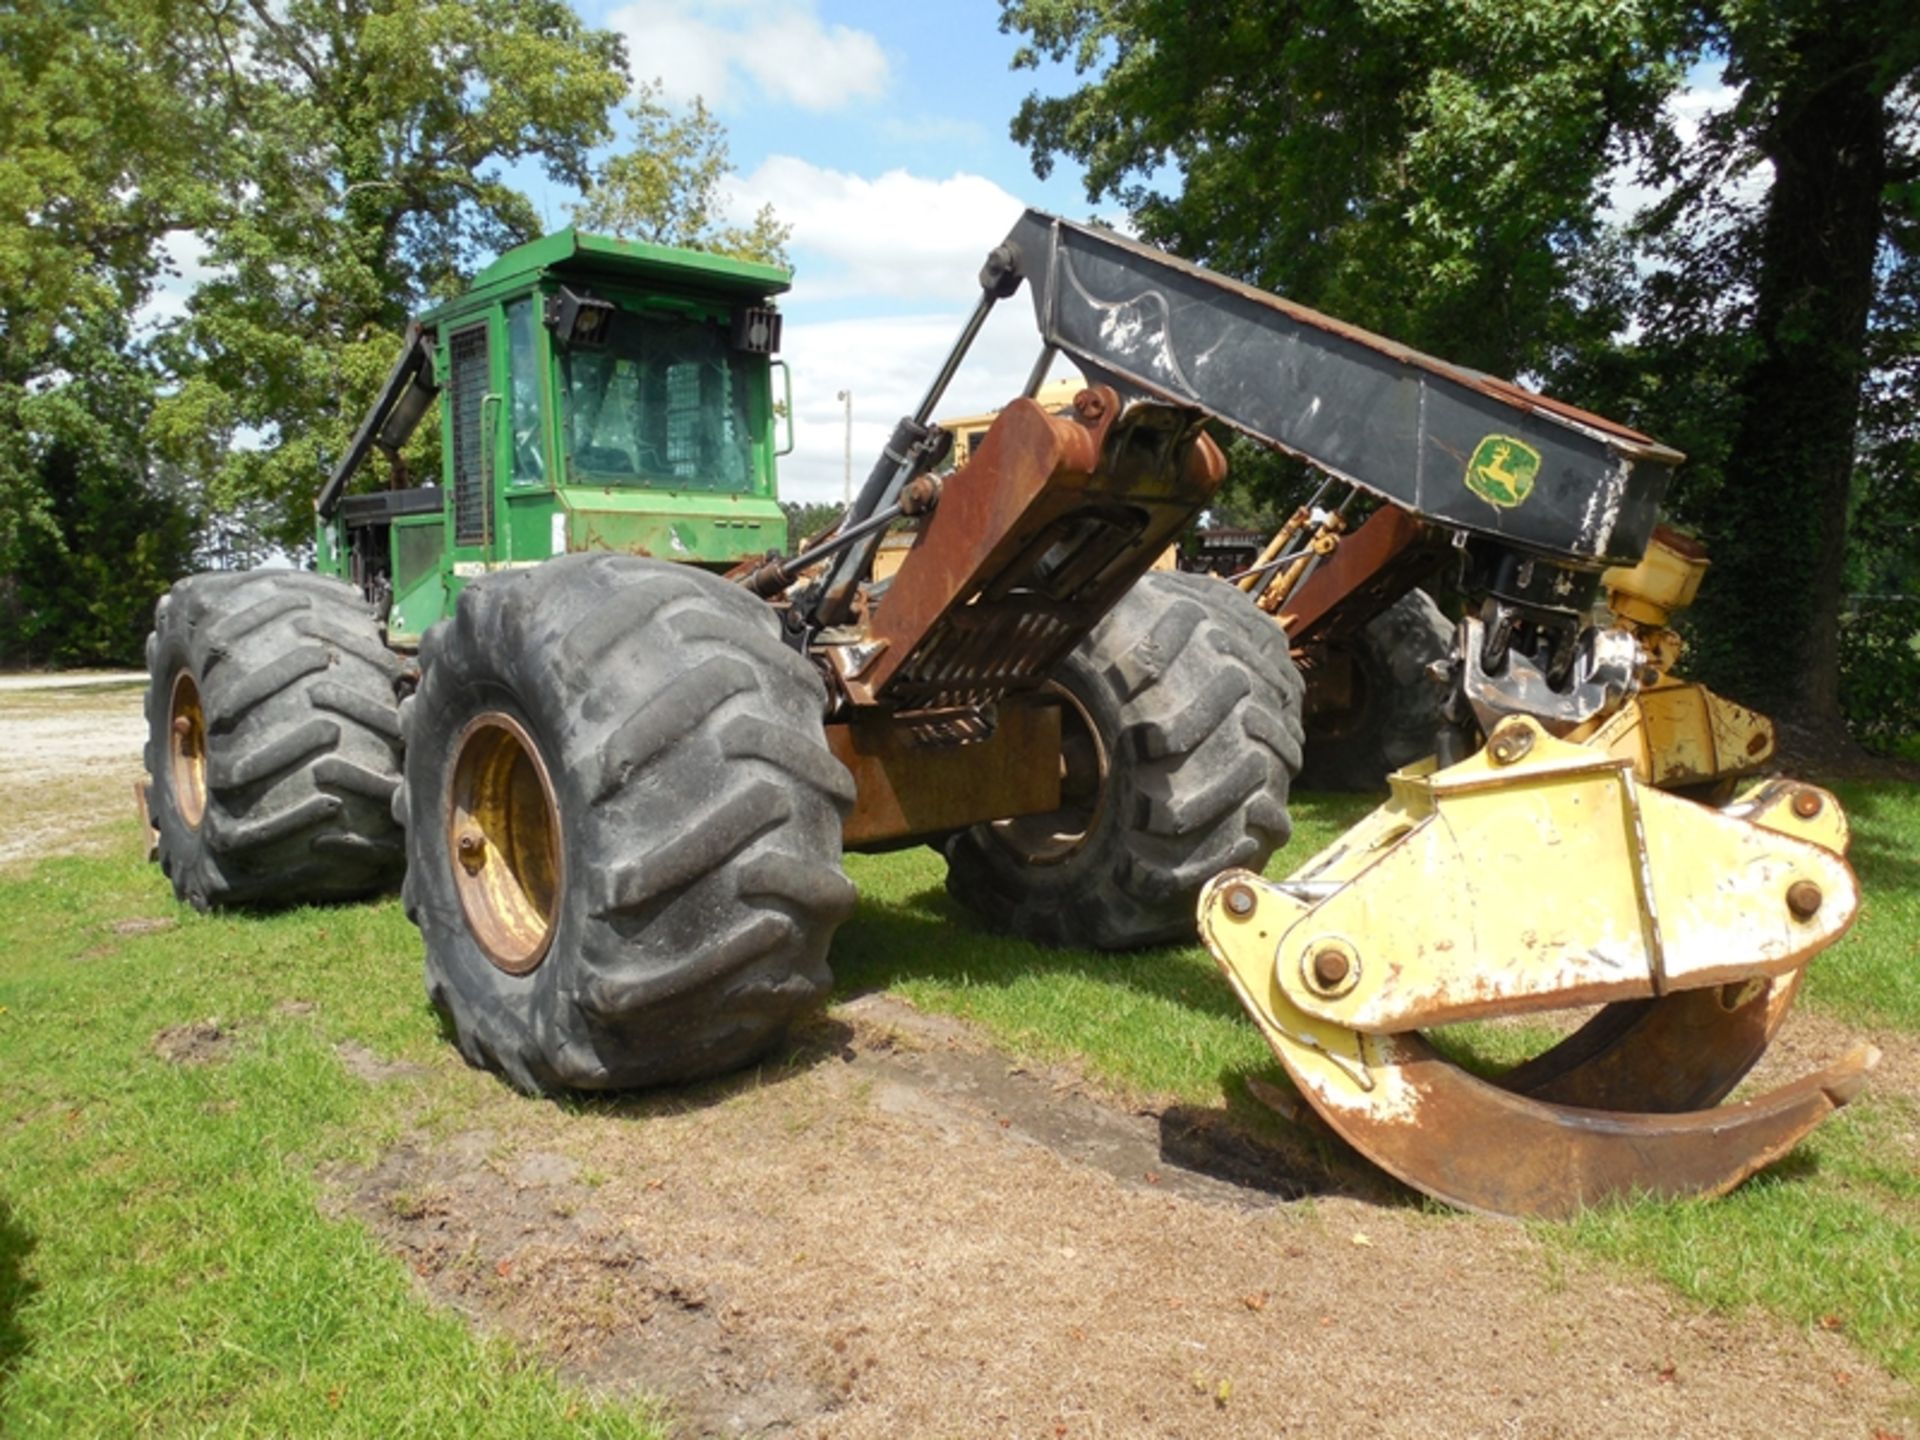 2005 JD 648GIII winch dual arch grappleser# 648Gx60749835.5 x 32 tires - Image 4 of 7